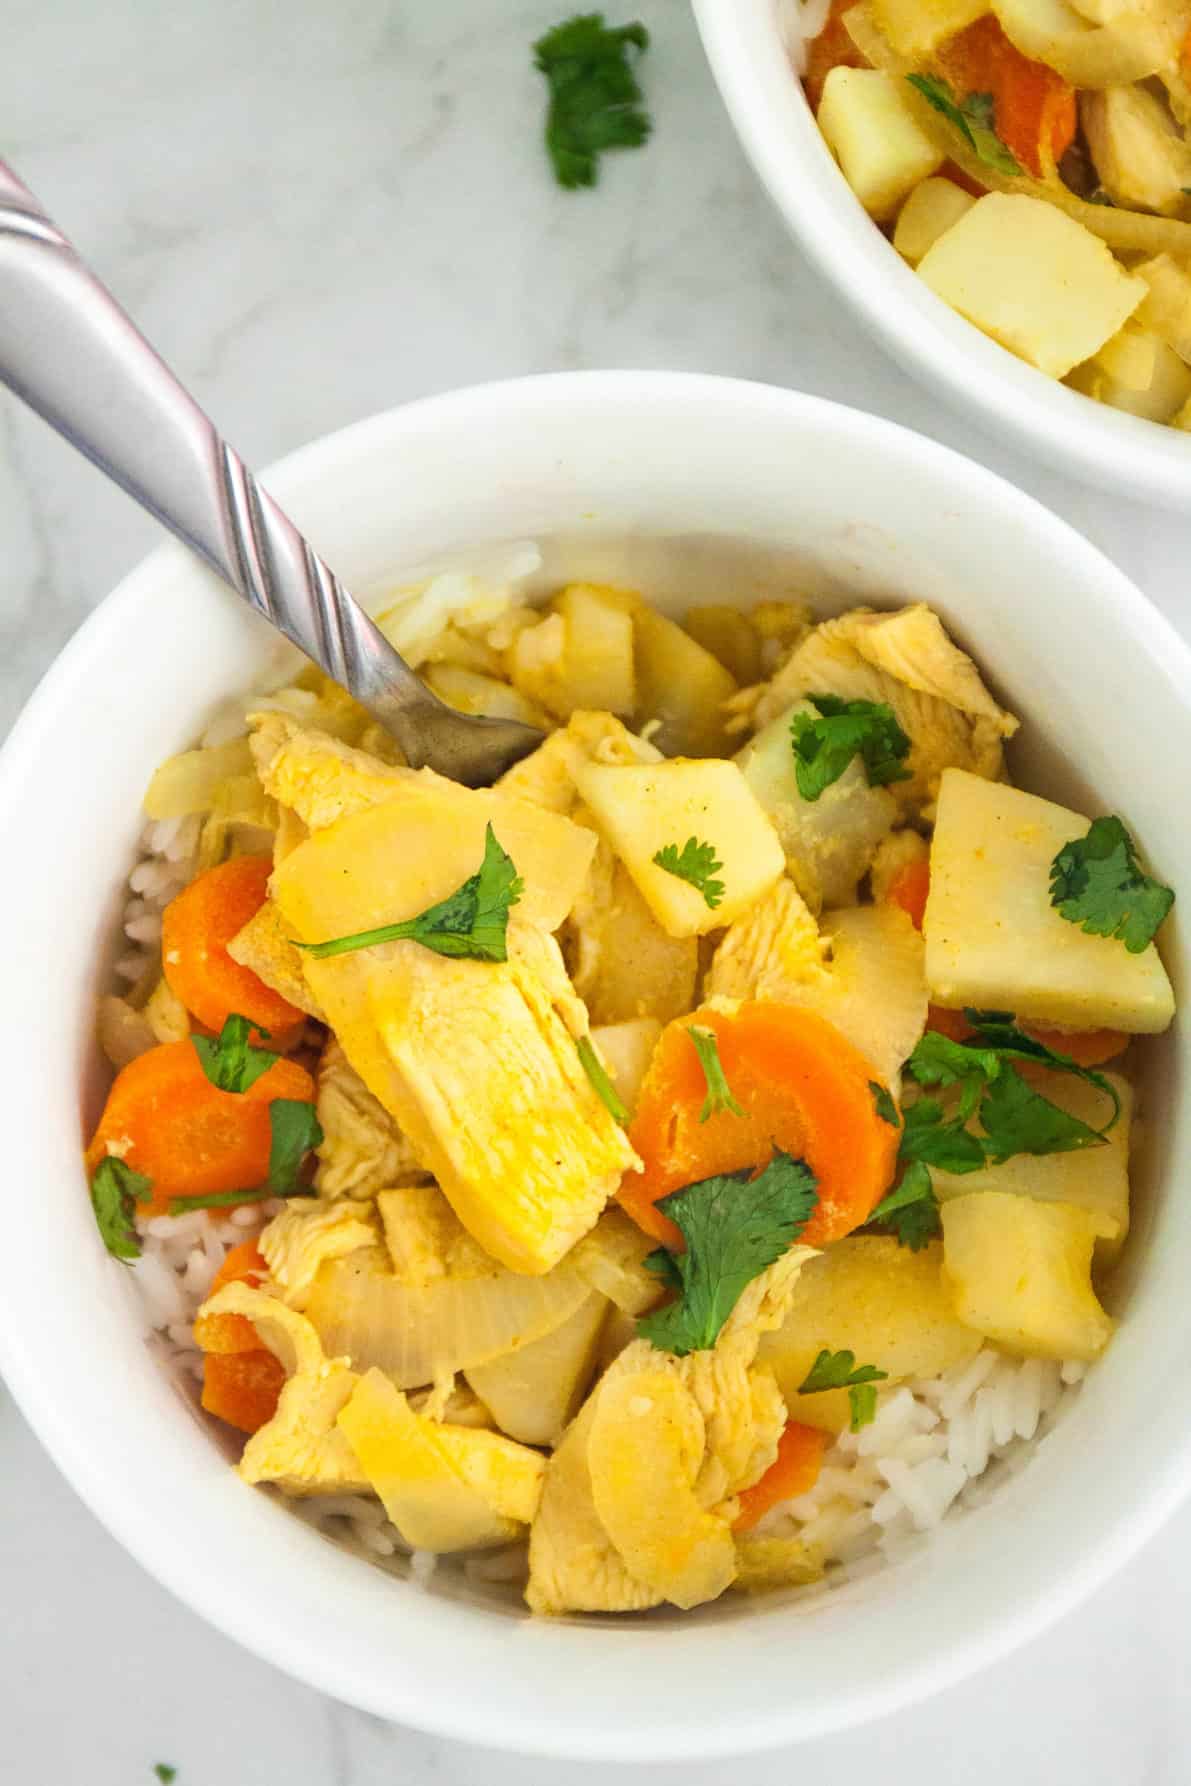 Yellow Thai Curry is a glorious combination of flavors and textures. Veggies, coconut milk, and curry paste help to create the ultimate comfort food dish.